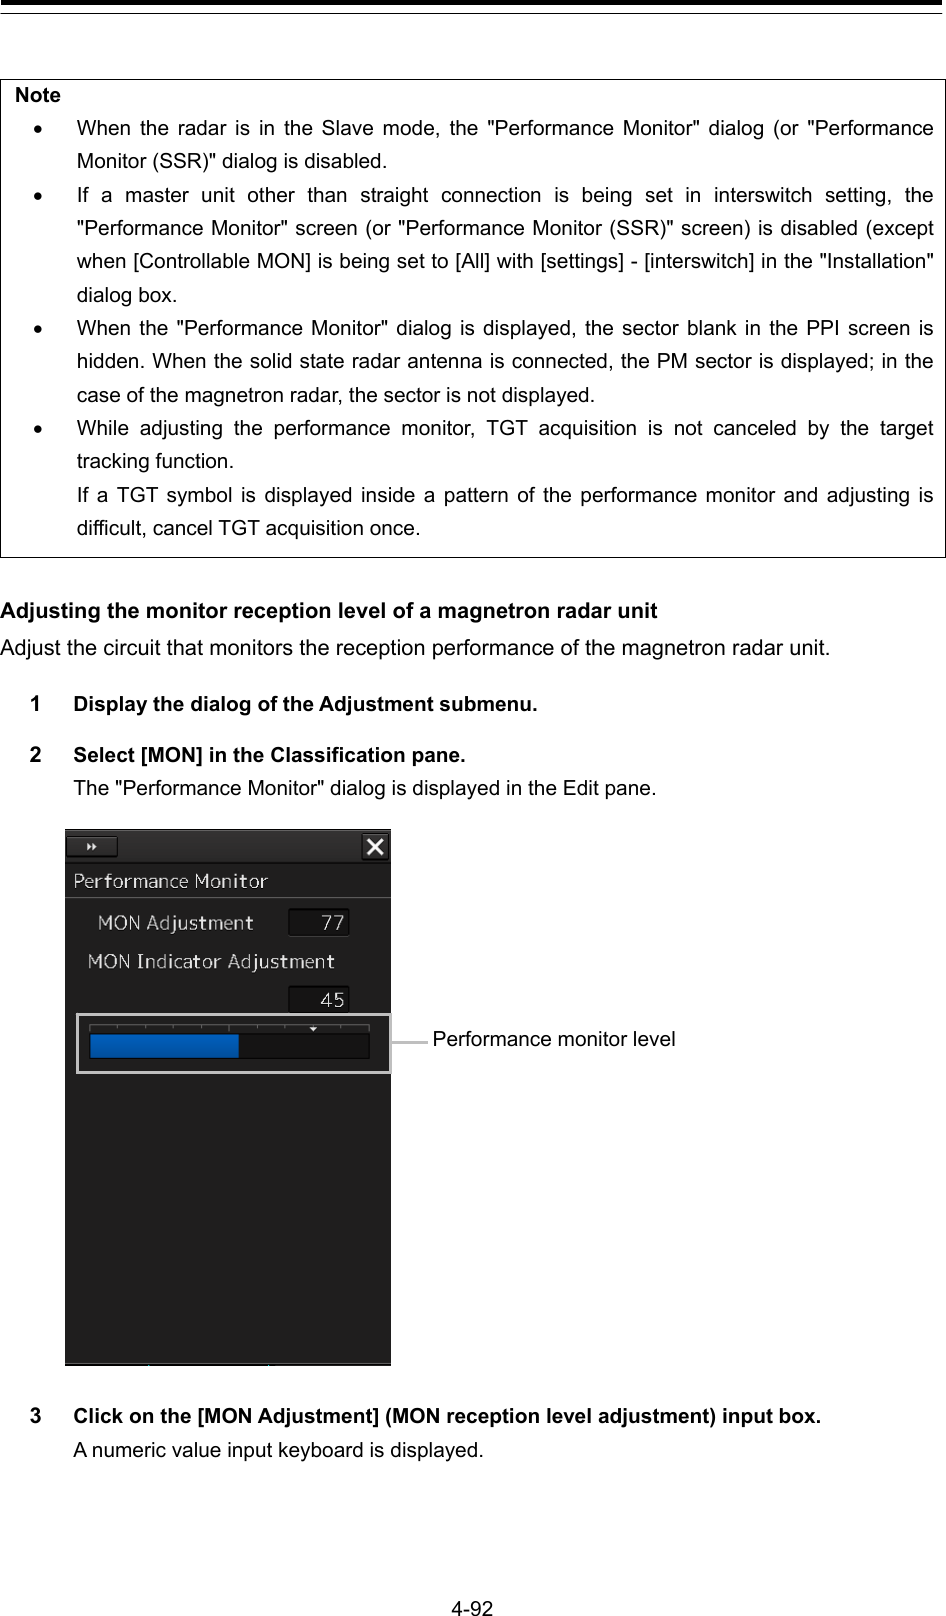  4-92  Note   When the radar is in the Slave mode, the &quot;Performance Monitor&quot; dialog (or &quot;Performance Monitor (SSR)&quot; dialog is disabled.   If a master unit other than straight connection is being set in interswitch setting, the &quot;Performance Monitor&quot; screen (or &quot;Performance Monitor (SSR)&quot; screen) is disabled (except when [Controllable MON] is being set to [All] with [settings] - [interswitch] in the &quot;Installation&quot; dialog box.   When the &quot;Performance Monitor&quot; dialog is displayed, the sector blank in the PPI screen is hidden. When the solid state radar antenna is connected, the PM sector is displayed; in the case of the magnetron radar, the sector is not displayed.   While adjusting the performance monitor, TGT acquisition is not canceled by the target tracking function.   If a TGT symbol is displayed inside a pattern of the performance monitor and adjusting is difficult, cancel TGT acquisition once.  Adjusting the monitor reception level of a magnetron radar unit Adjust the circuit that monitors the reception performance of the magnetron radar unit. 1  Display the dialog of the Adjustment submenu. 2  Select [MON] in the Classification pane. The &quot;Performance Monitor&quot; dialog is displayed in the Edit pane.   3  Click on the [MON Adjustment] (MON reception level adjustment) input box. A numeric value input keyboard is displayed.   Performance monitor level 